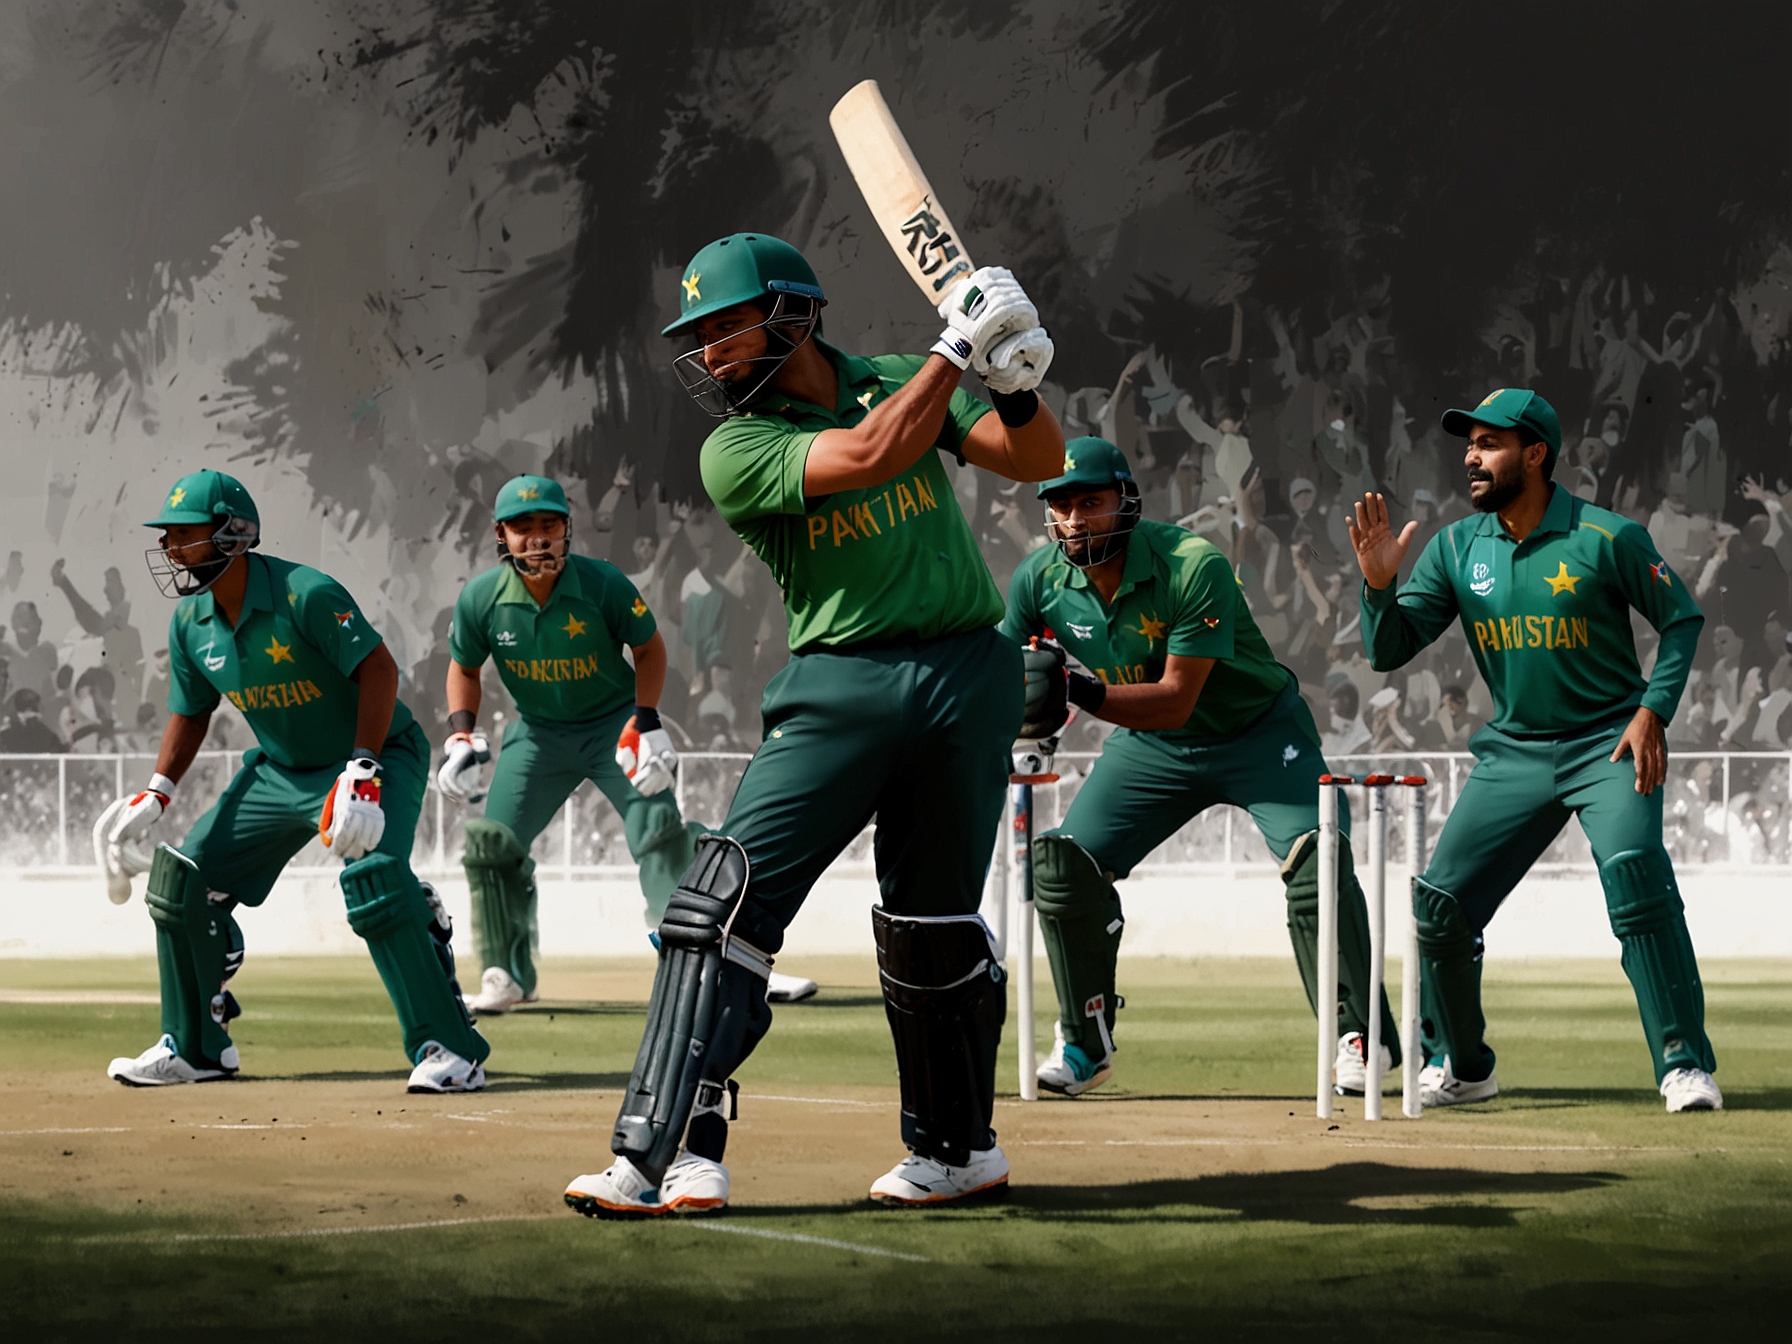 Pakistan cricket team in action during the ICC T20 World Cup, showcasing both highs and lows.